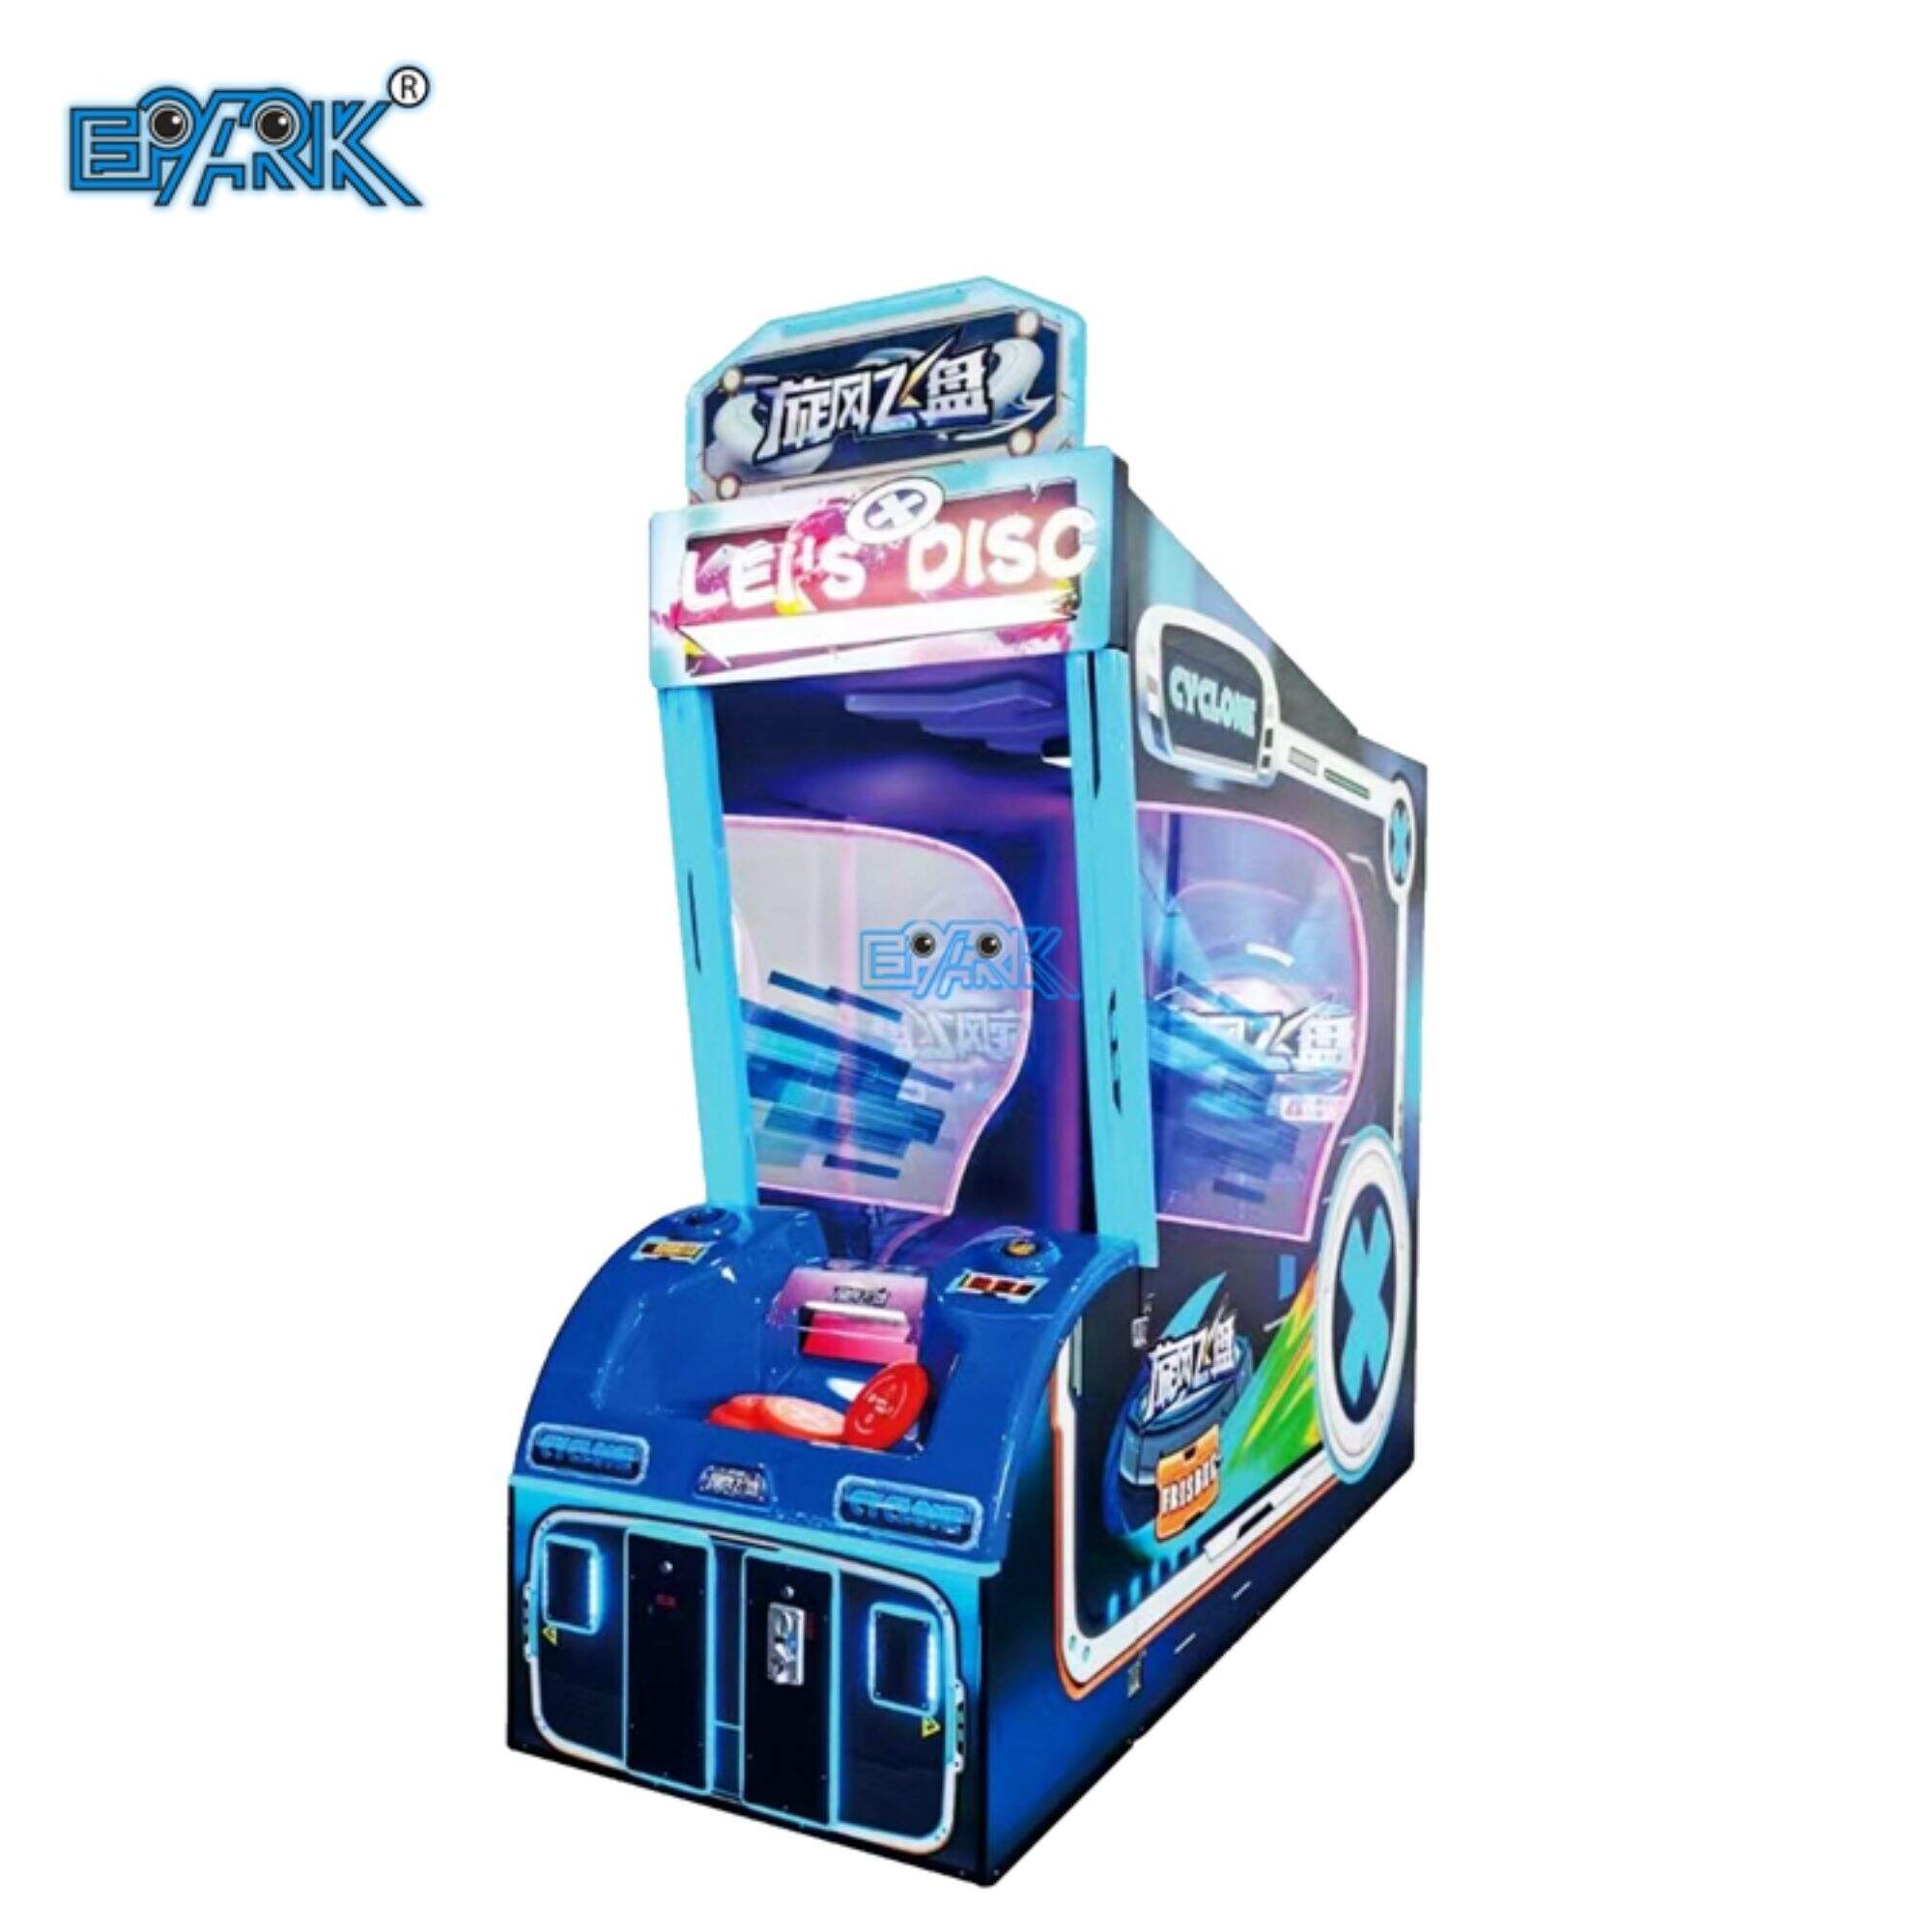 Coin Operated Game Machine Throwing Frisbee Game for Adults and Children for Decompression Arcade Entertainment